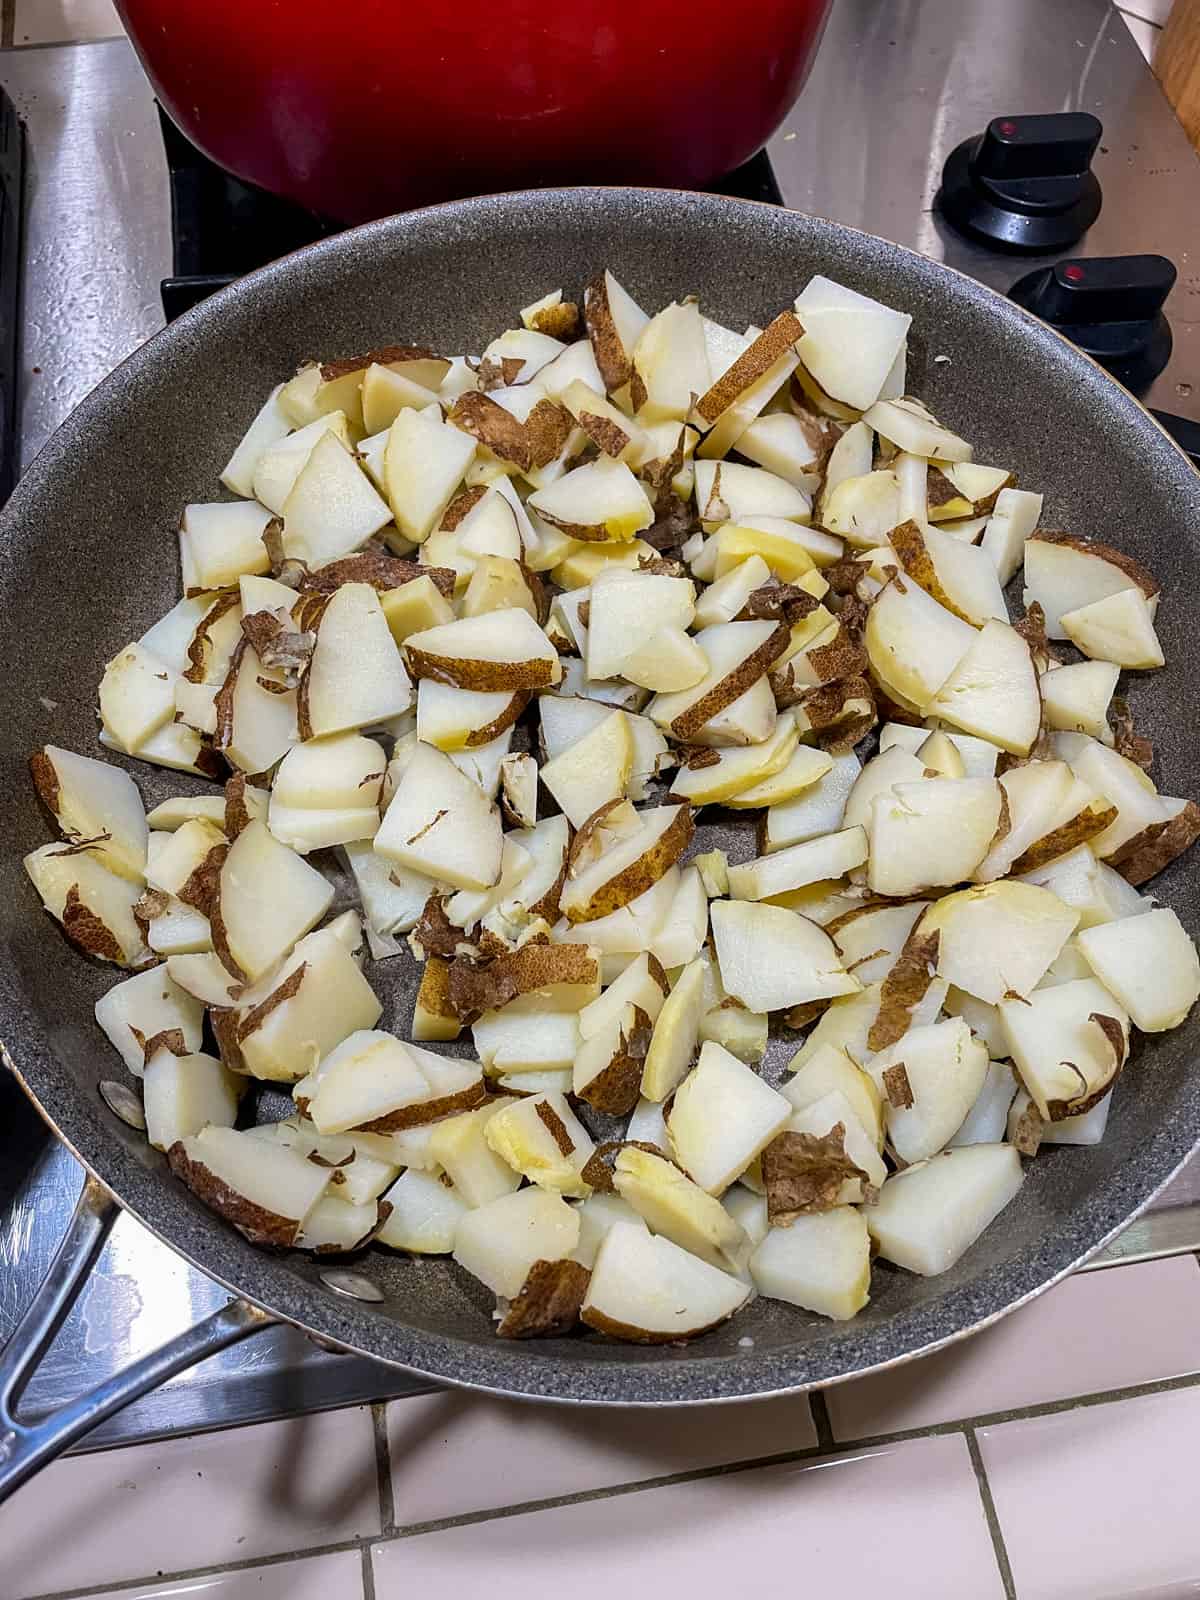 Heated non-stick pan with cut potatoes in it